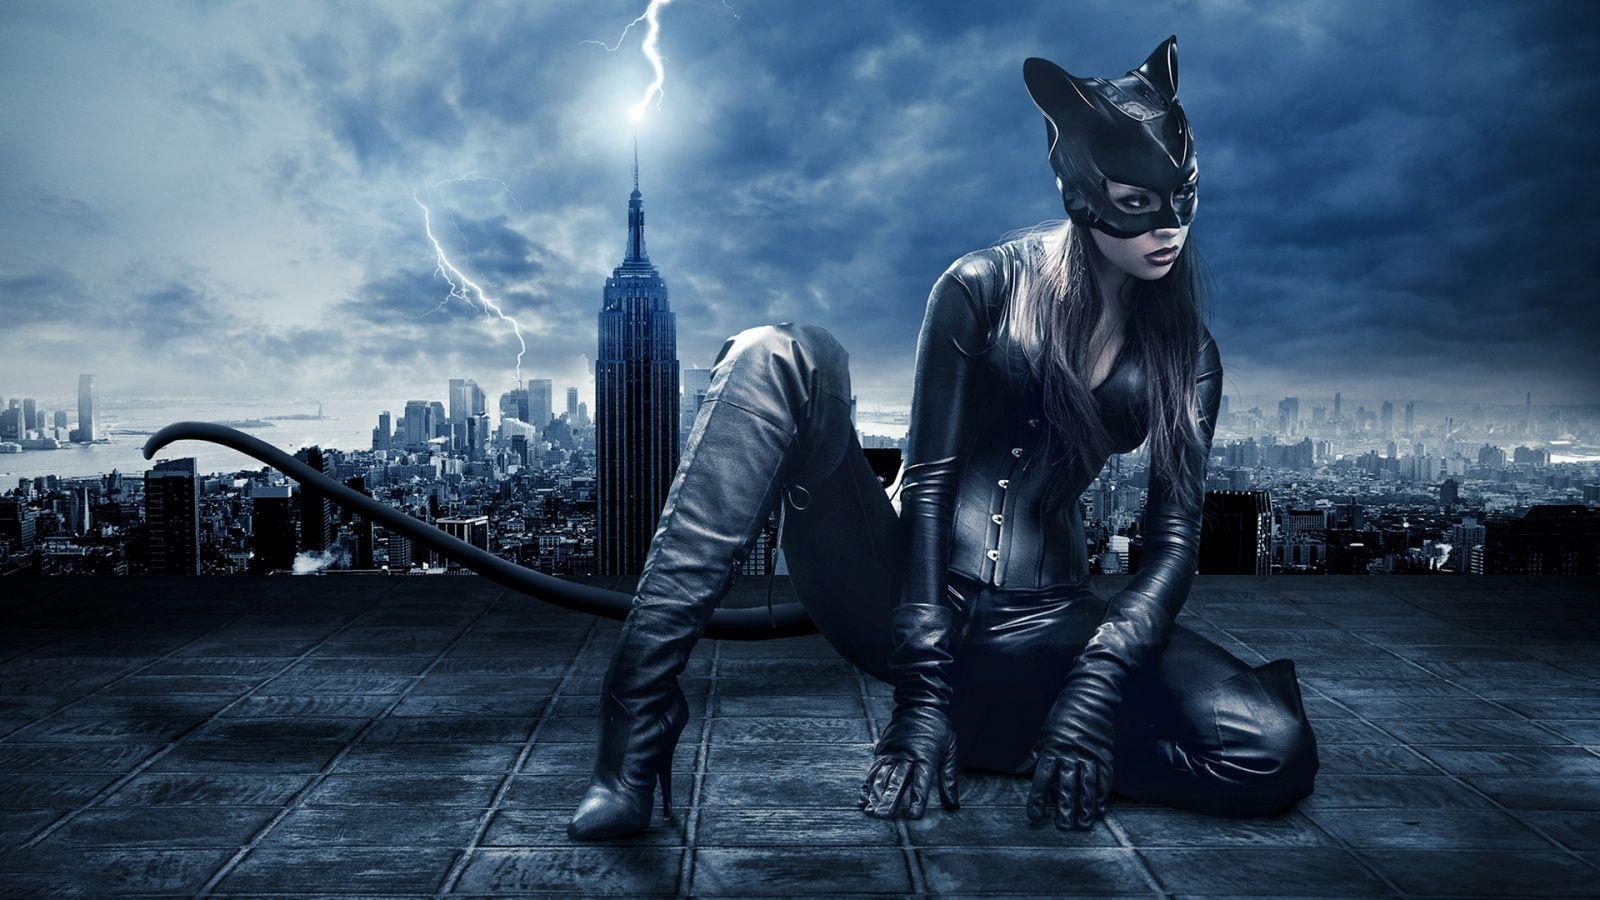 Catwoman HD Wallpaper (Picture)